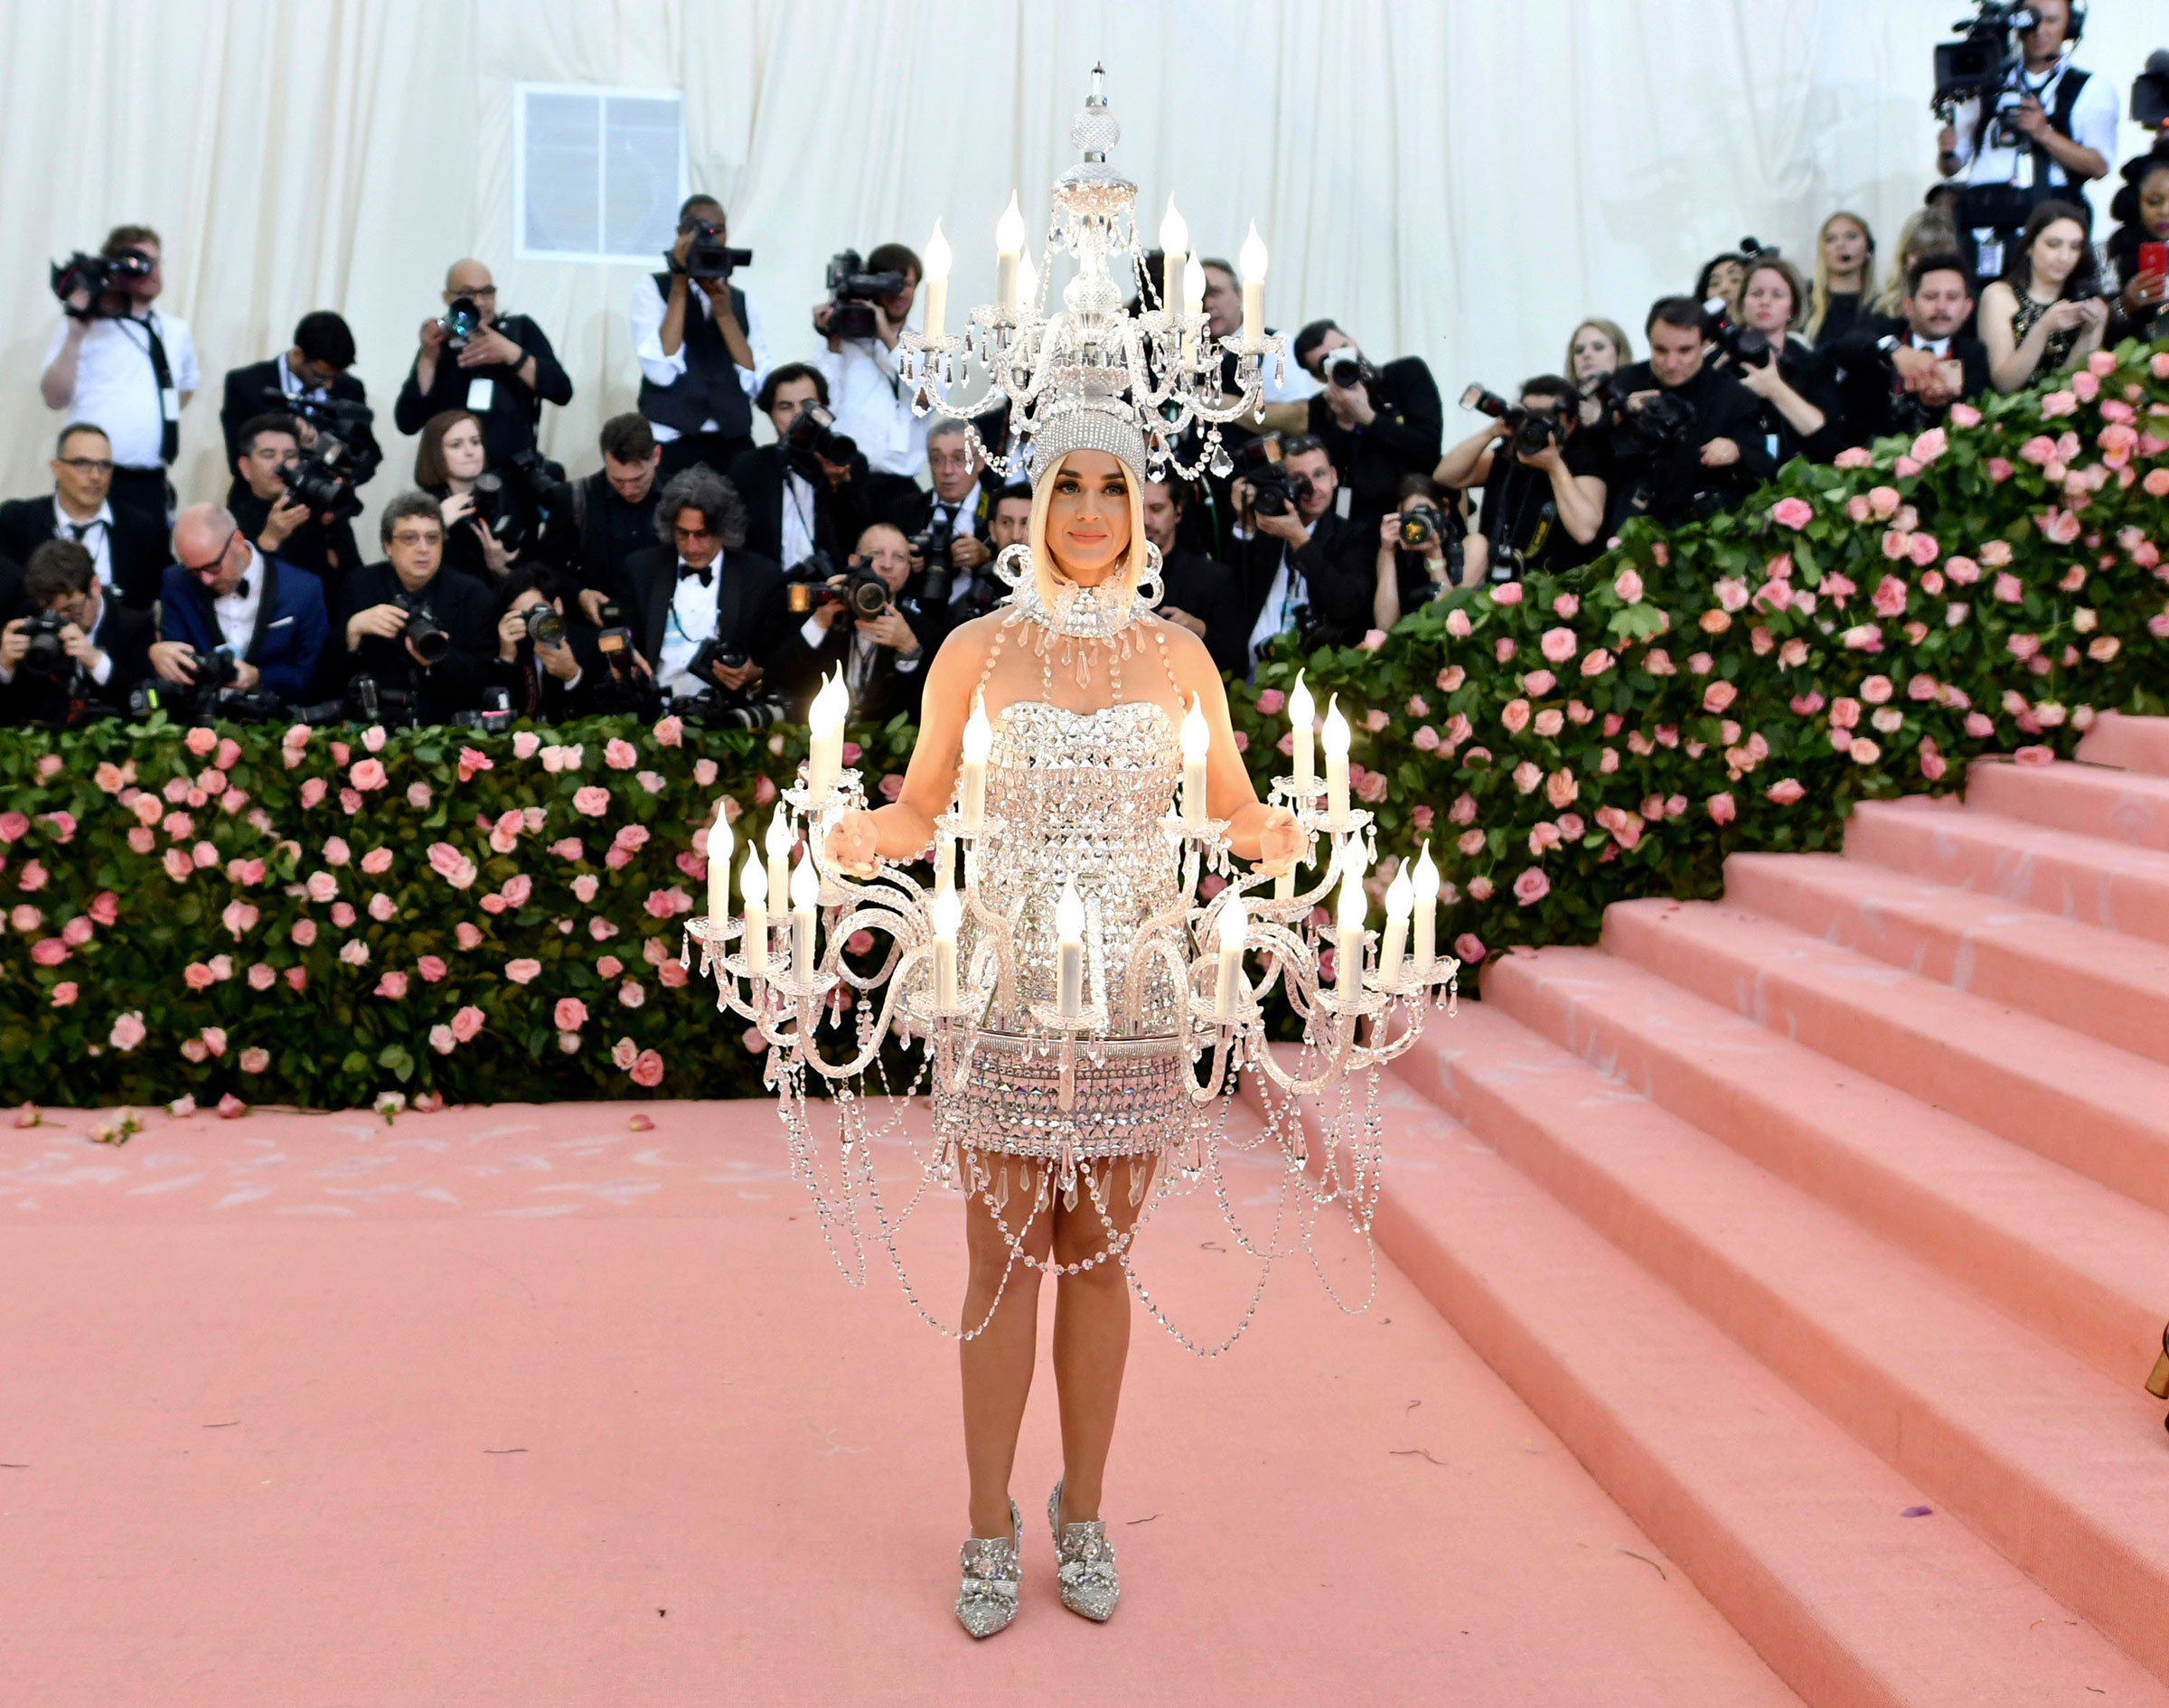 Katy Perry attends The Met gala celebrating the opening of the "Camp: Notes on Fashion" exhibition on Monday, May 6, 2019, in New York. (Charles Sykes—Invision/AP)